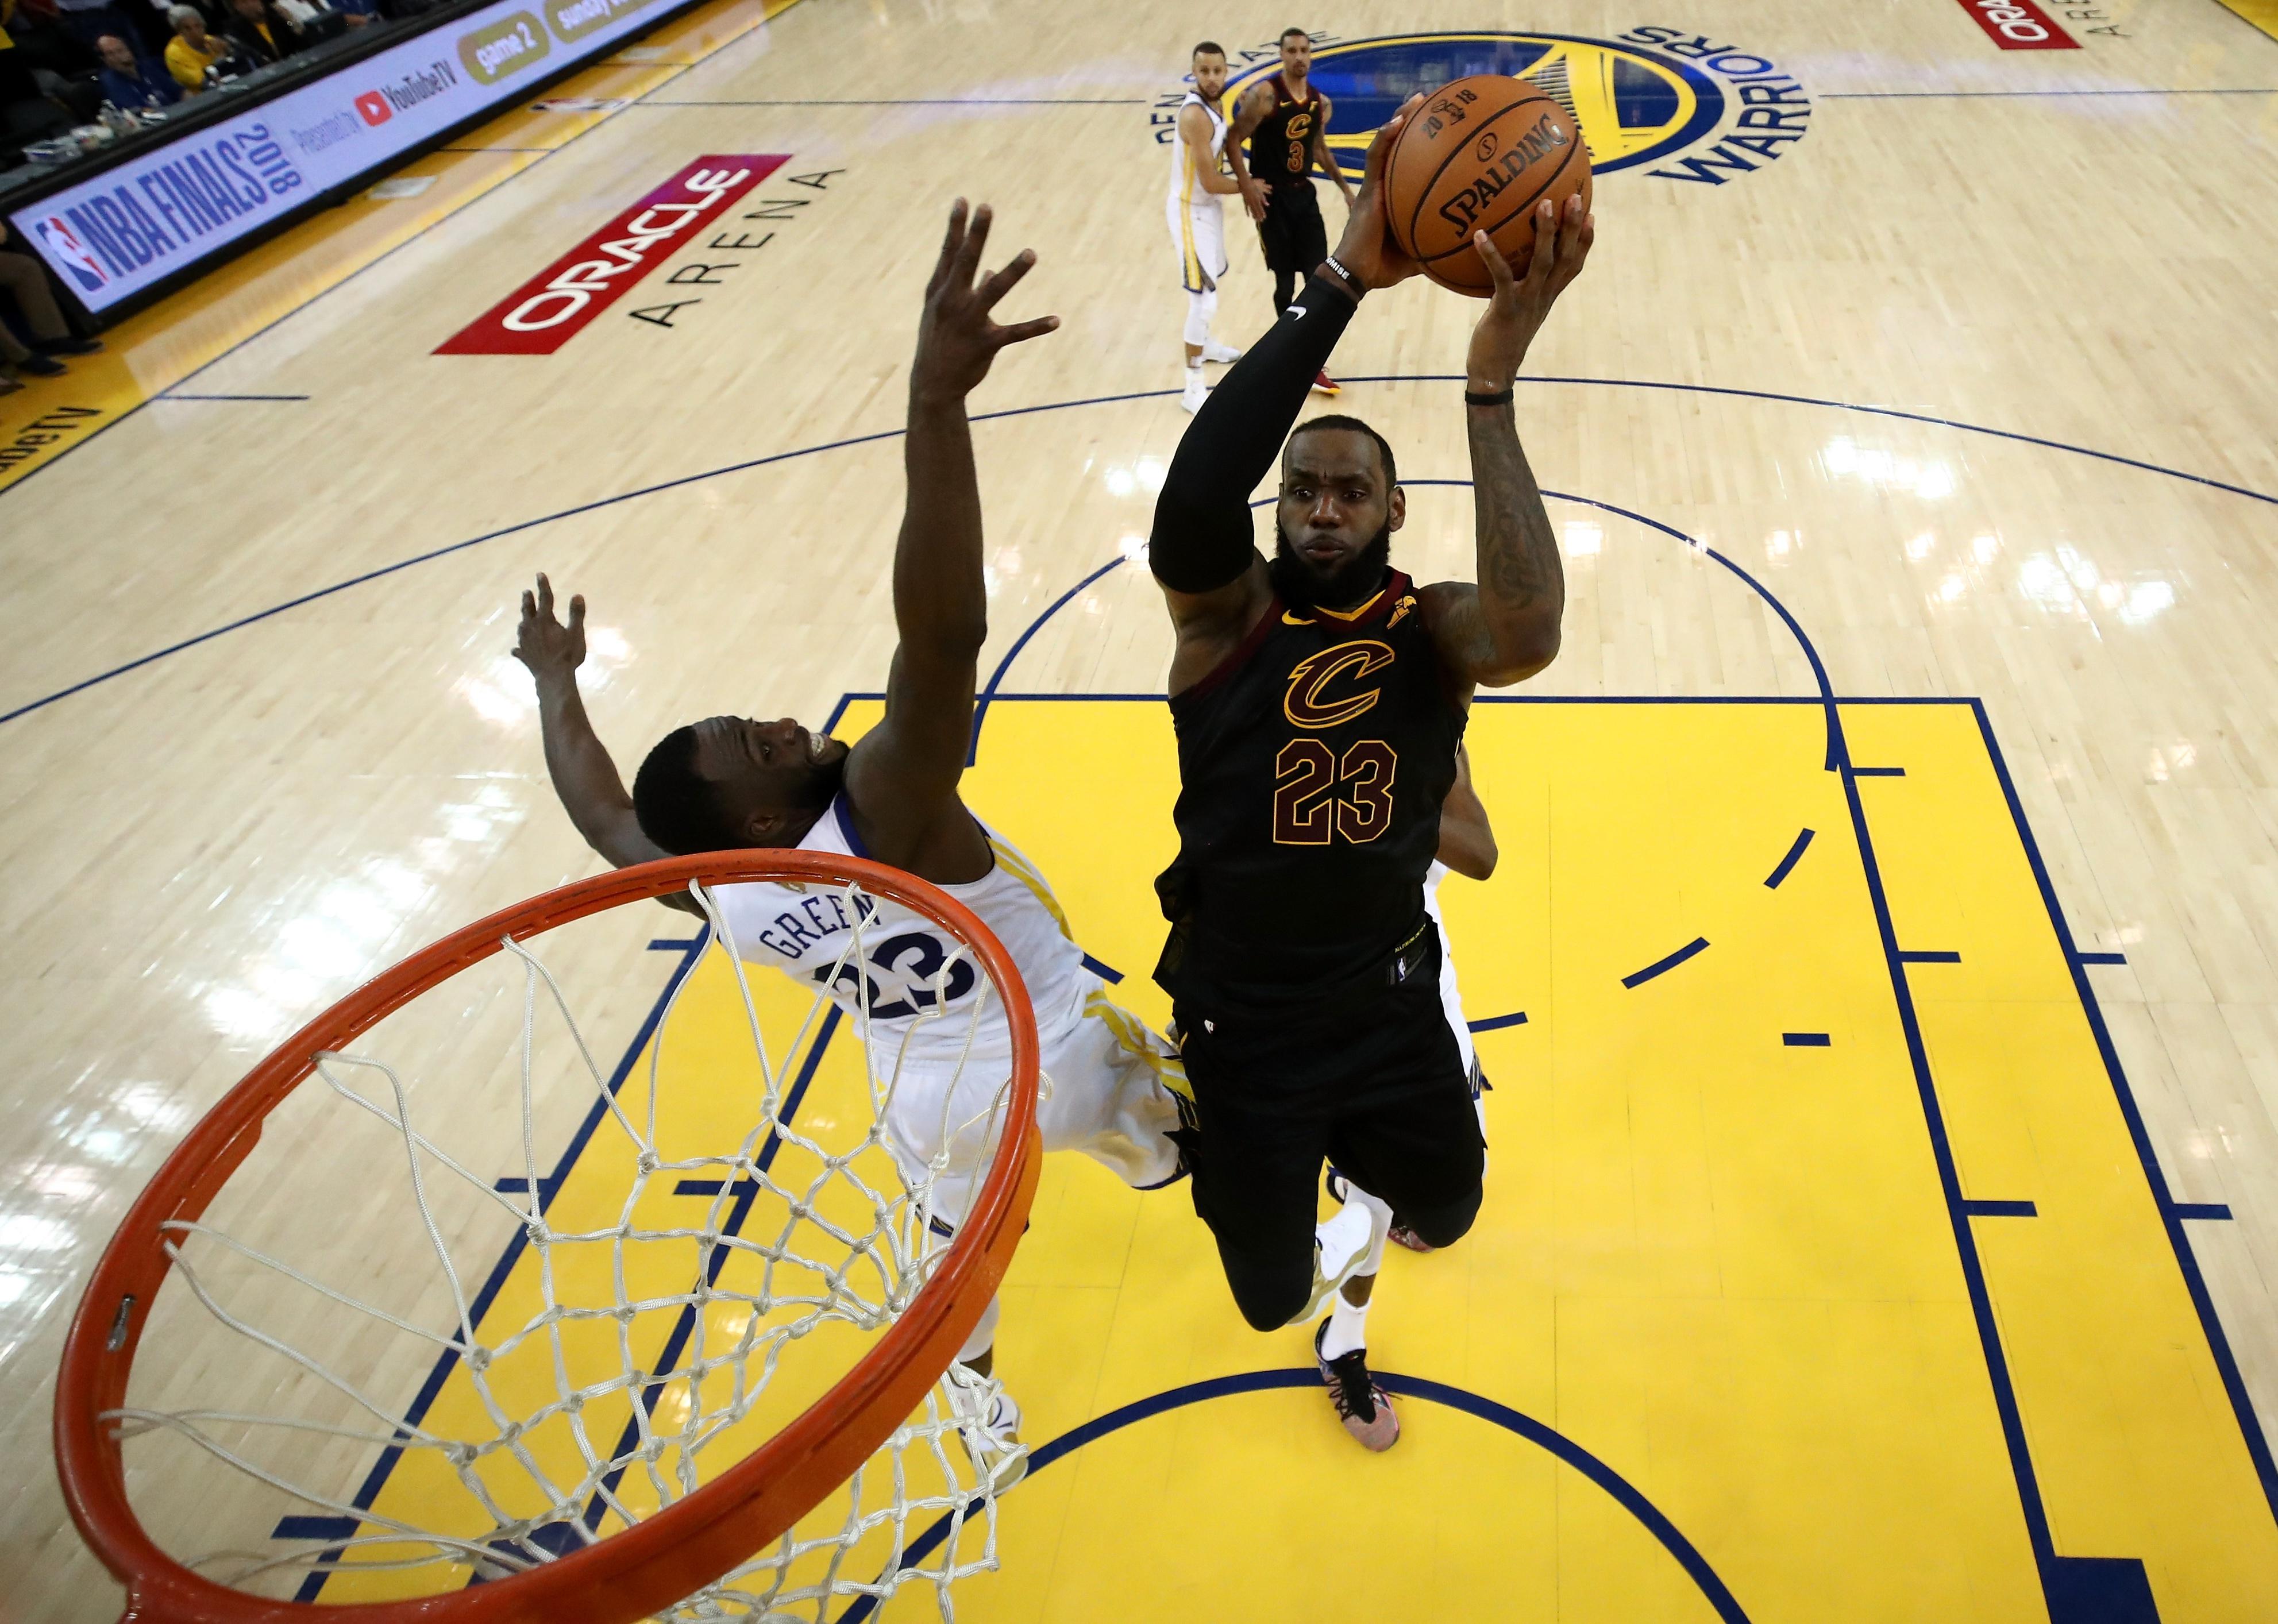 LeBron James of the Cleveland Cavaliers attempts a layup